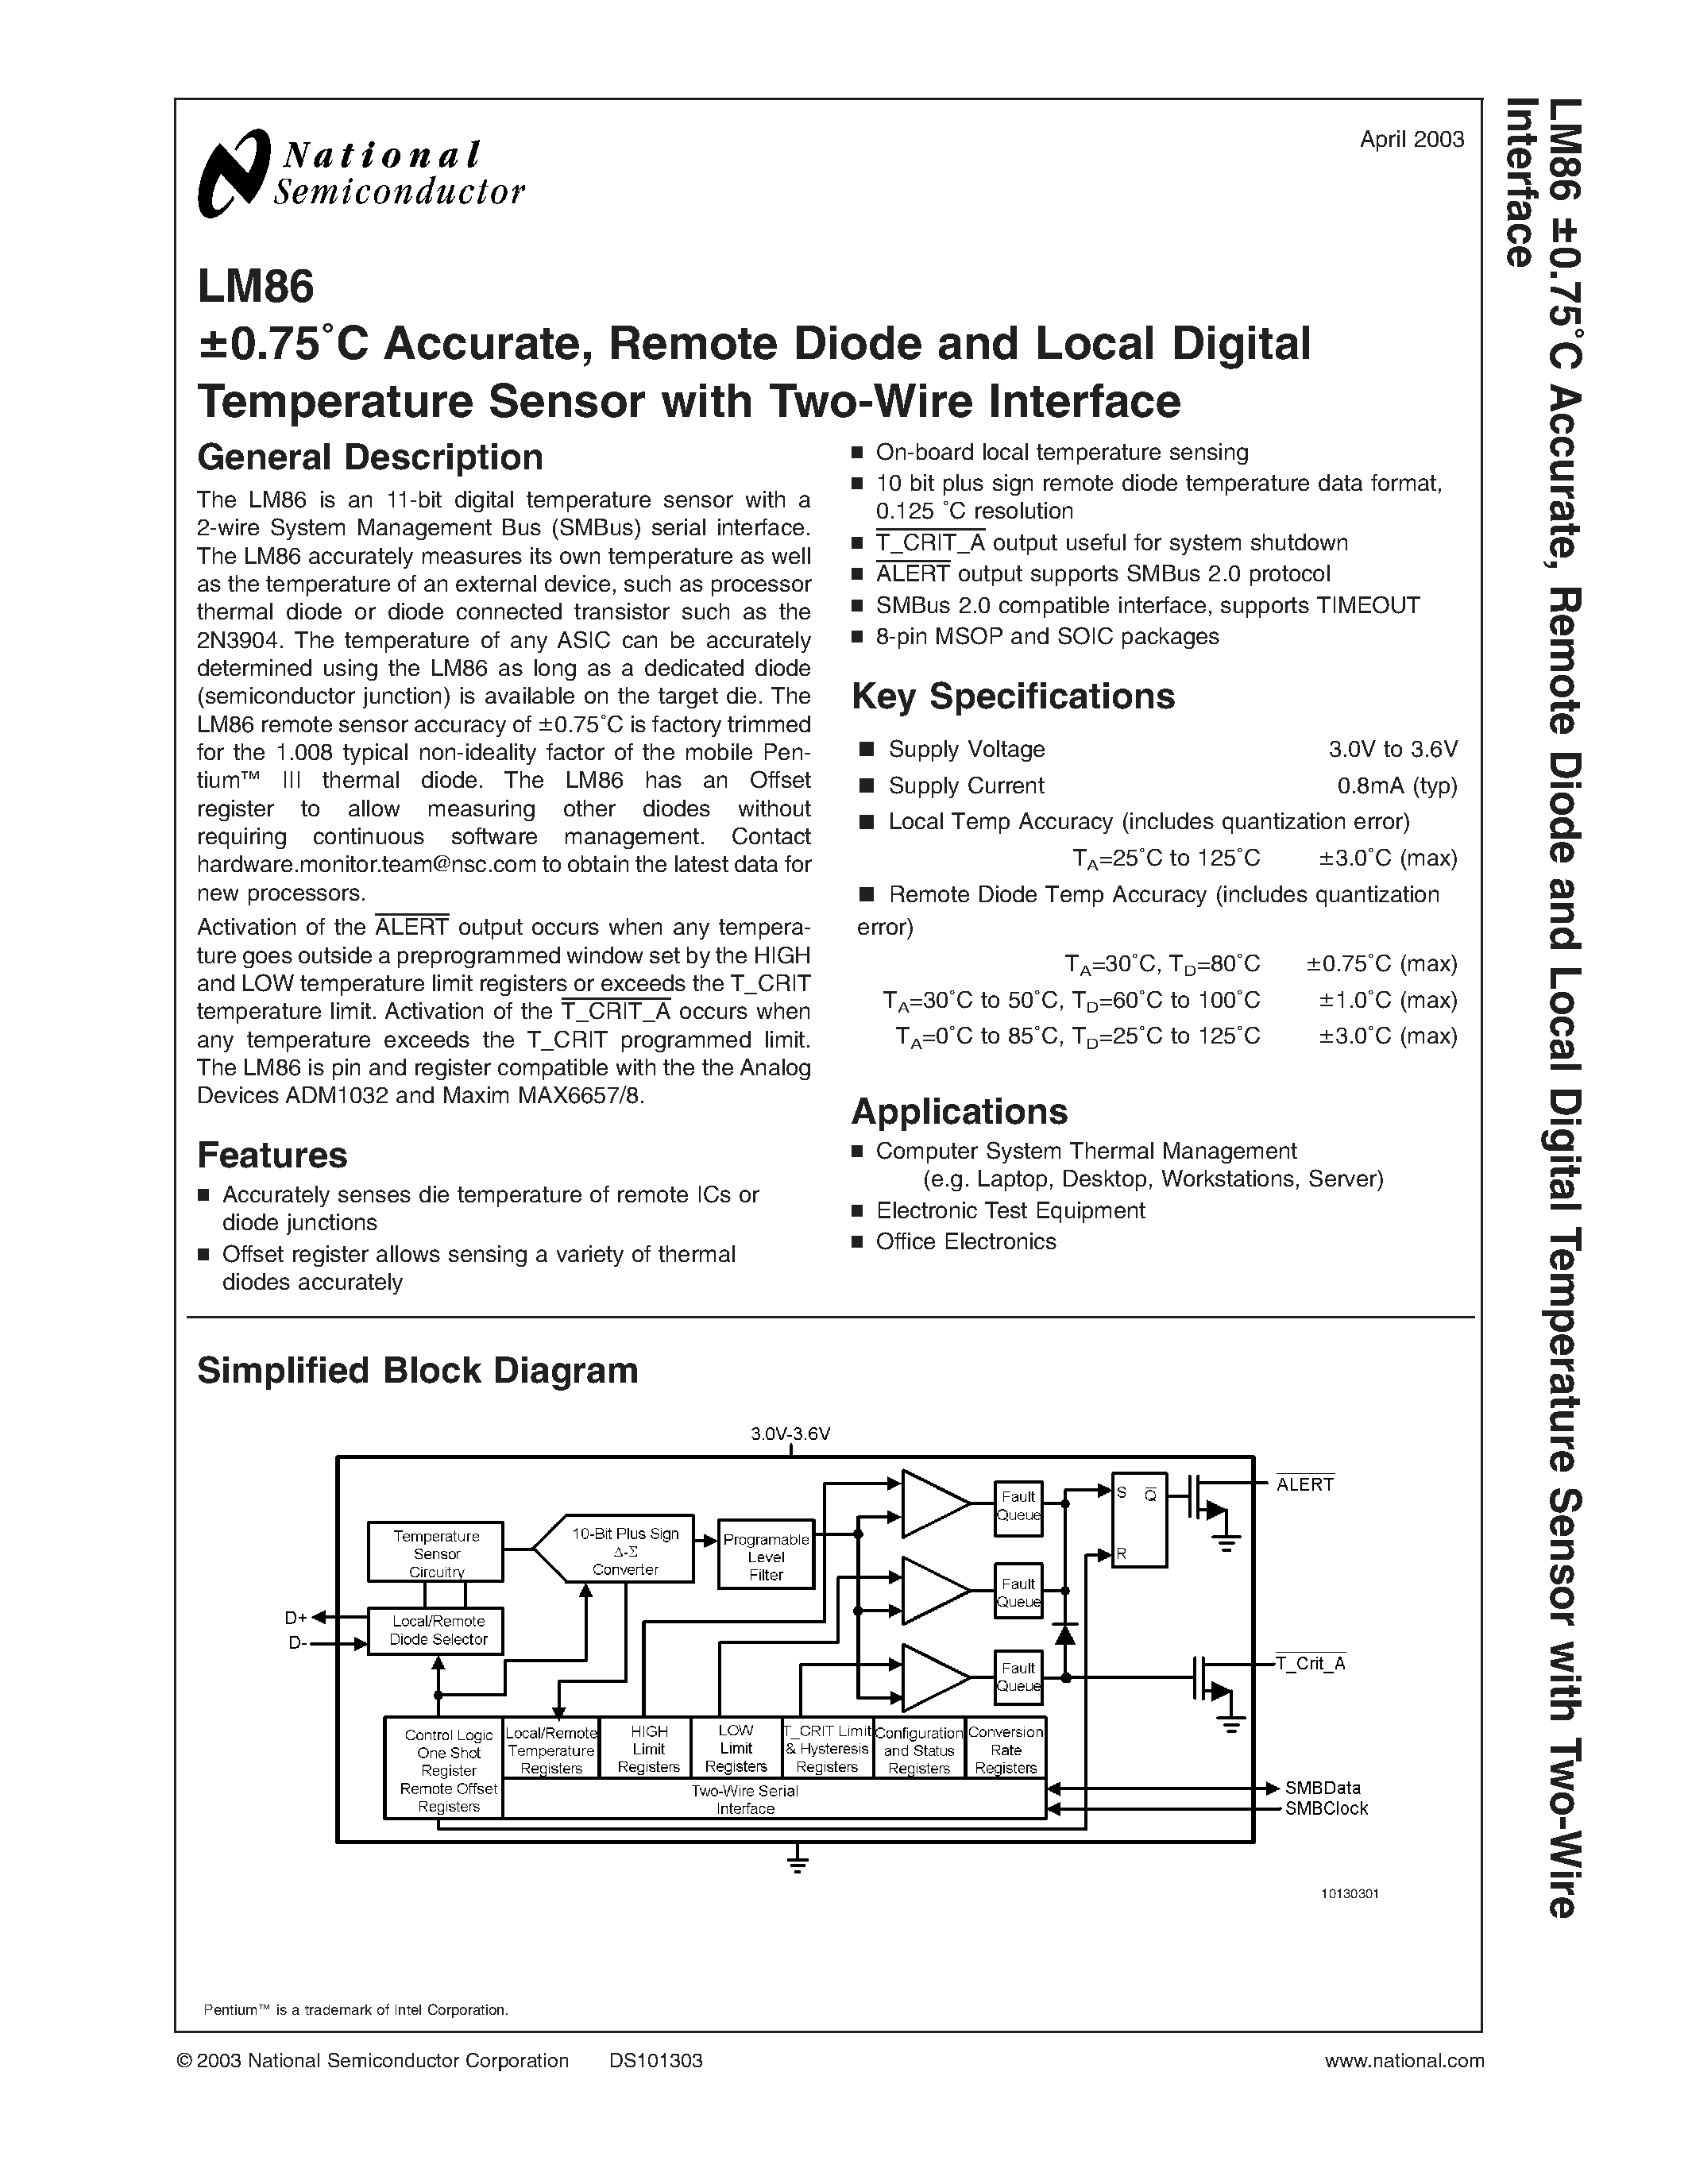 Datasheet LM86CIMMX - 0.75C Accurate / Remote Diode and Local Digital Temperature Sensor with Two-Wire Interface page 1